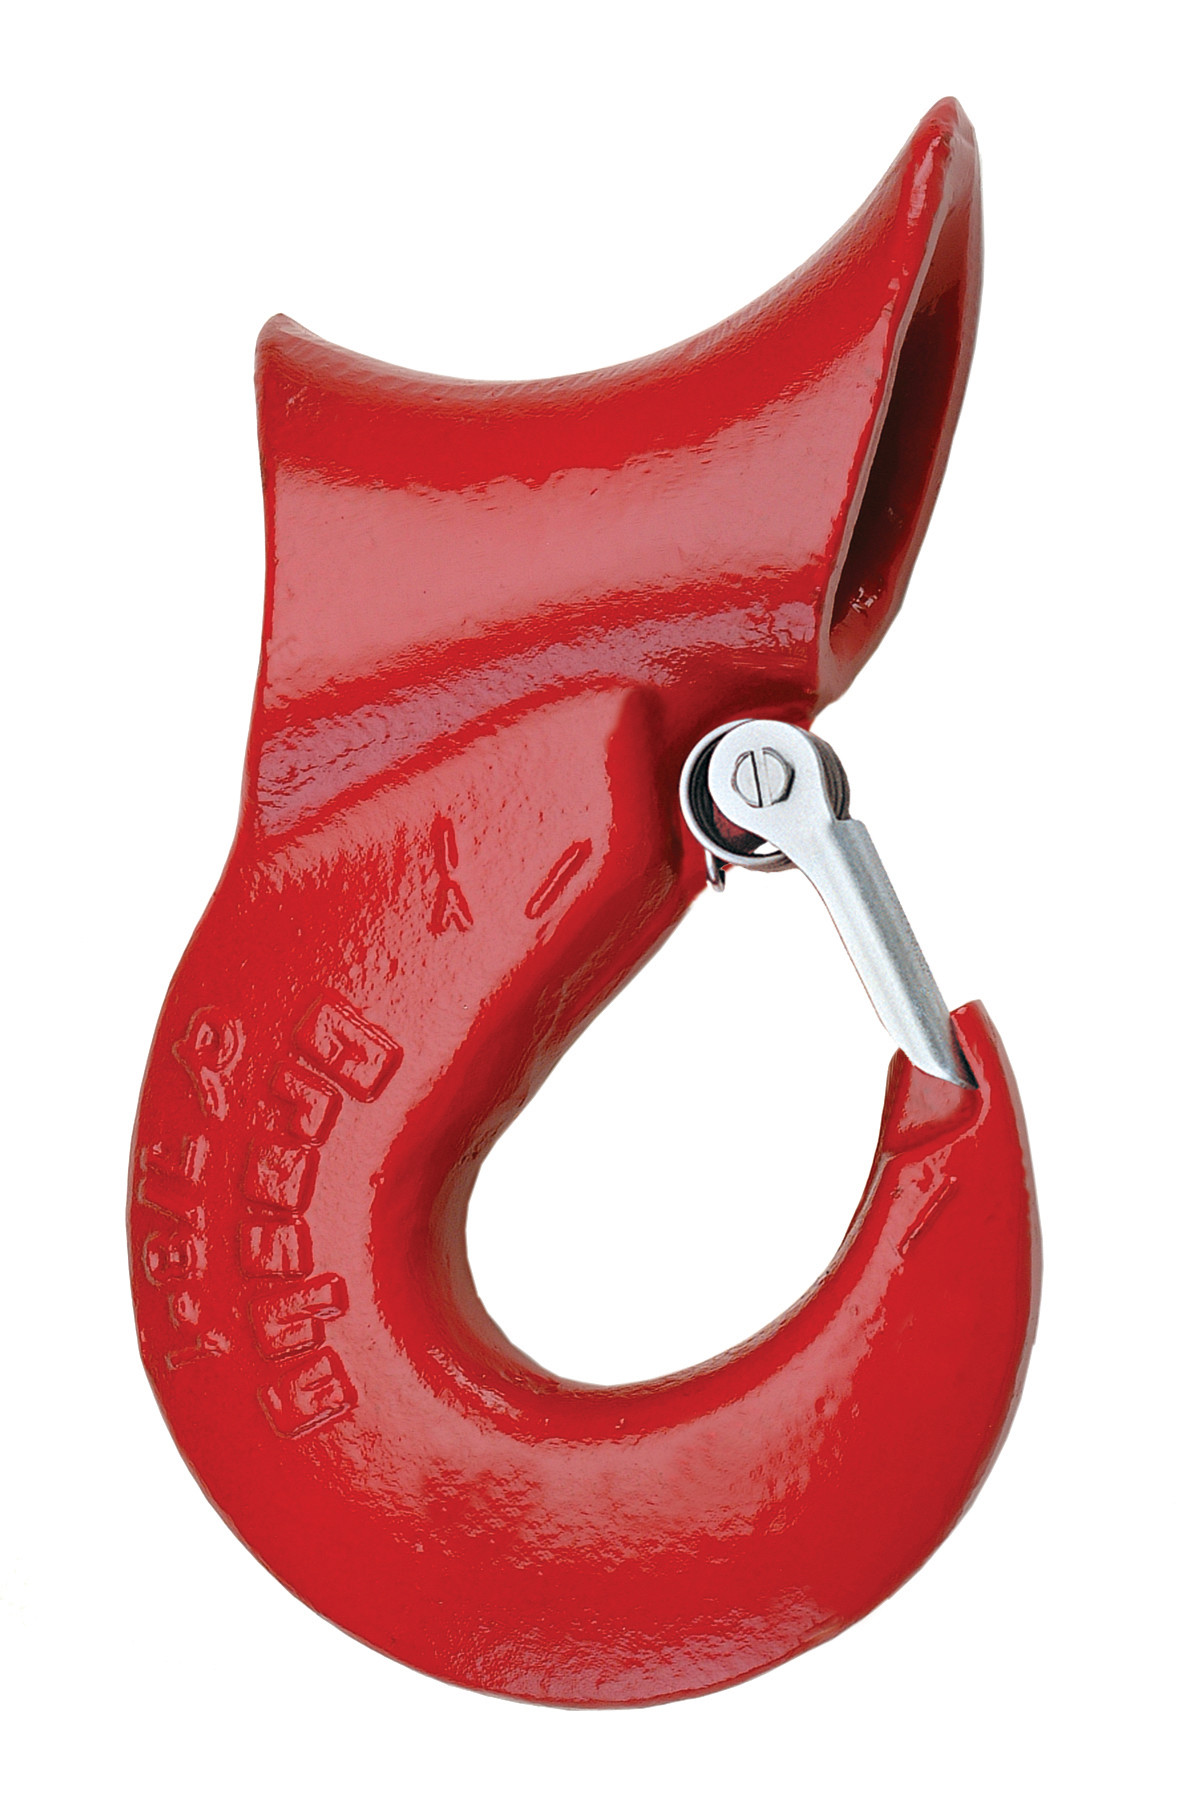 Crosby A-350L Forged Hooks image